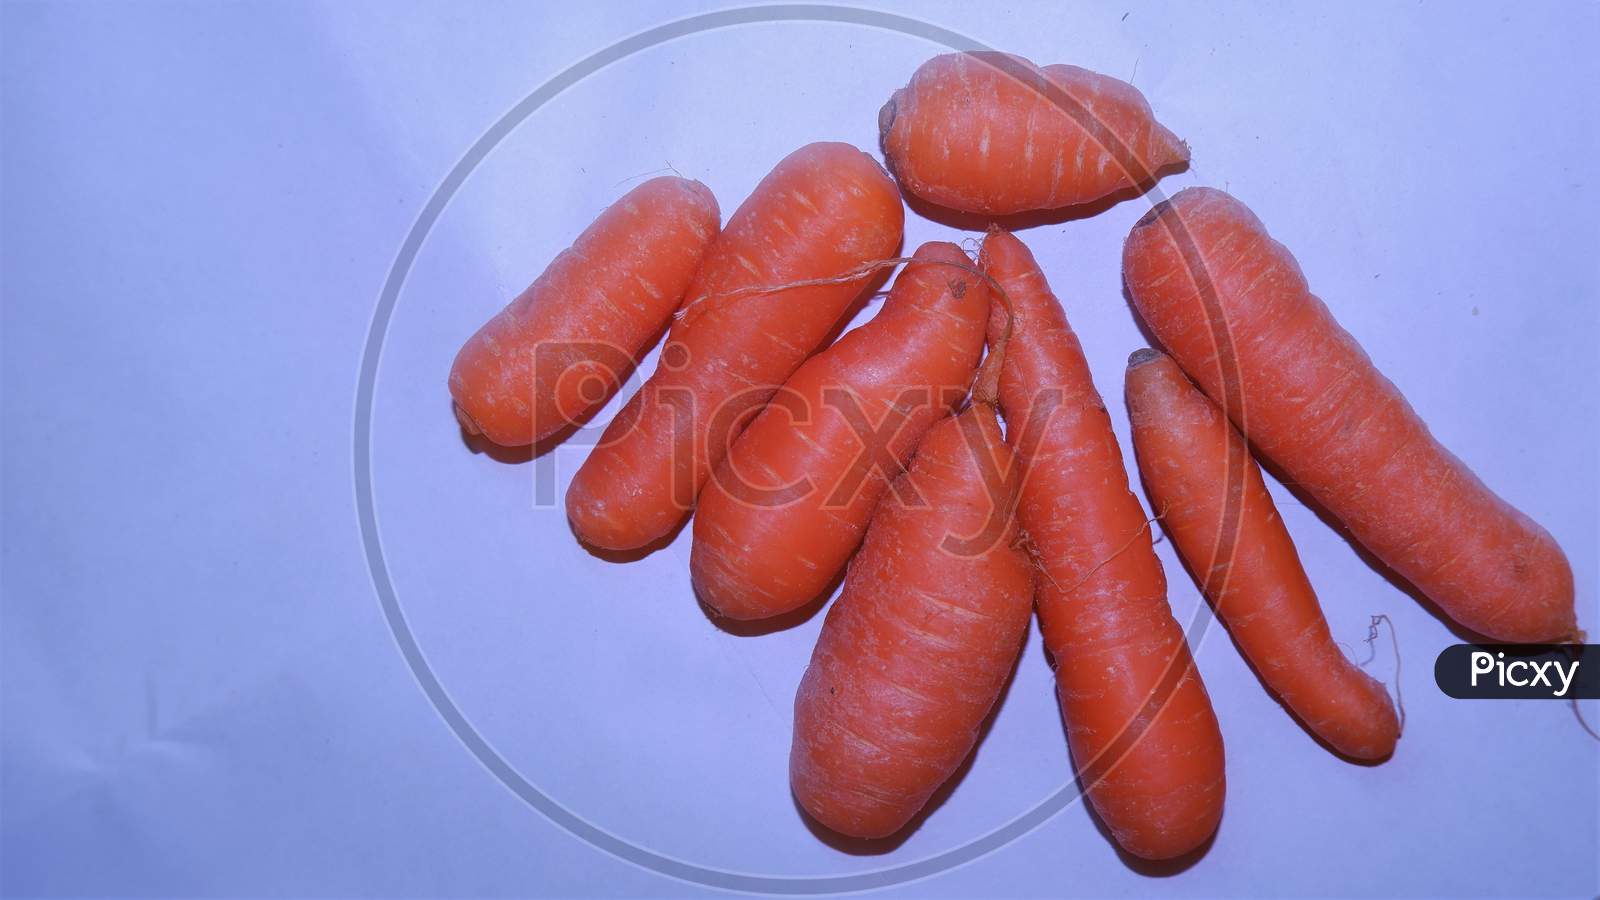 Set of small carrot in white back ground